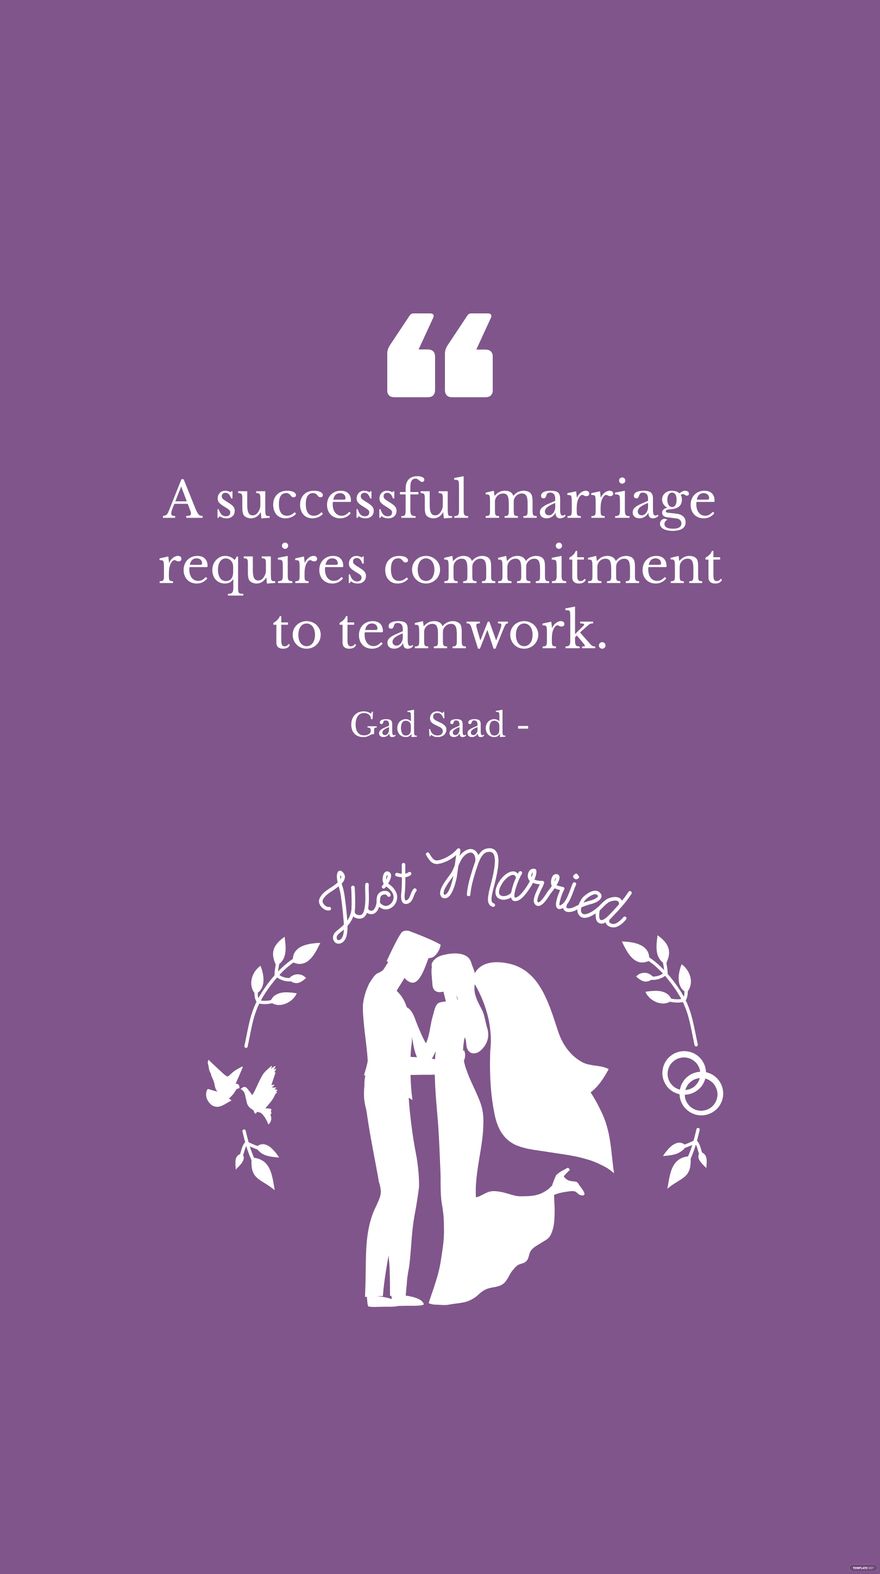 Free Gad Saad - A successful marriage requires commitment to teamwork. in JPG